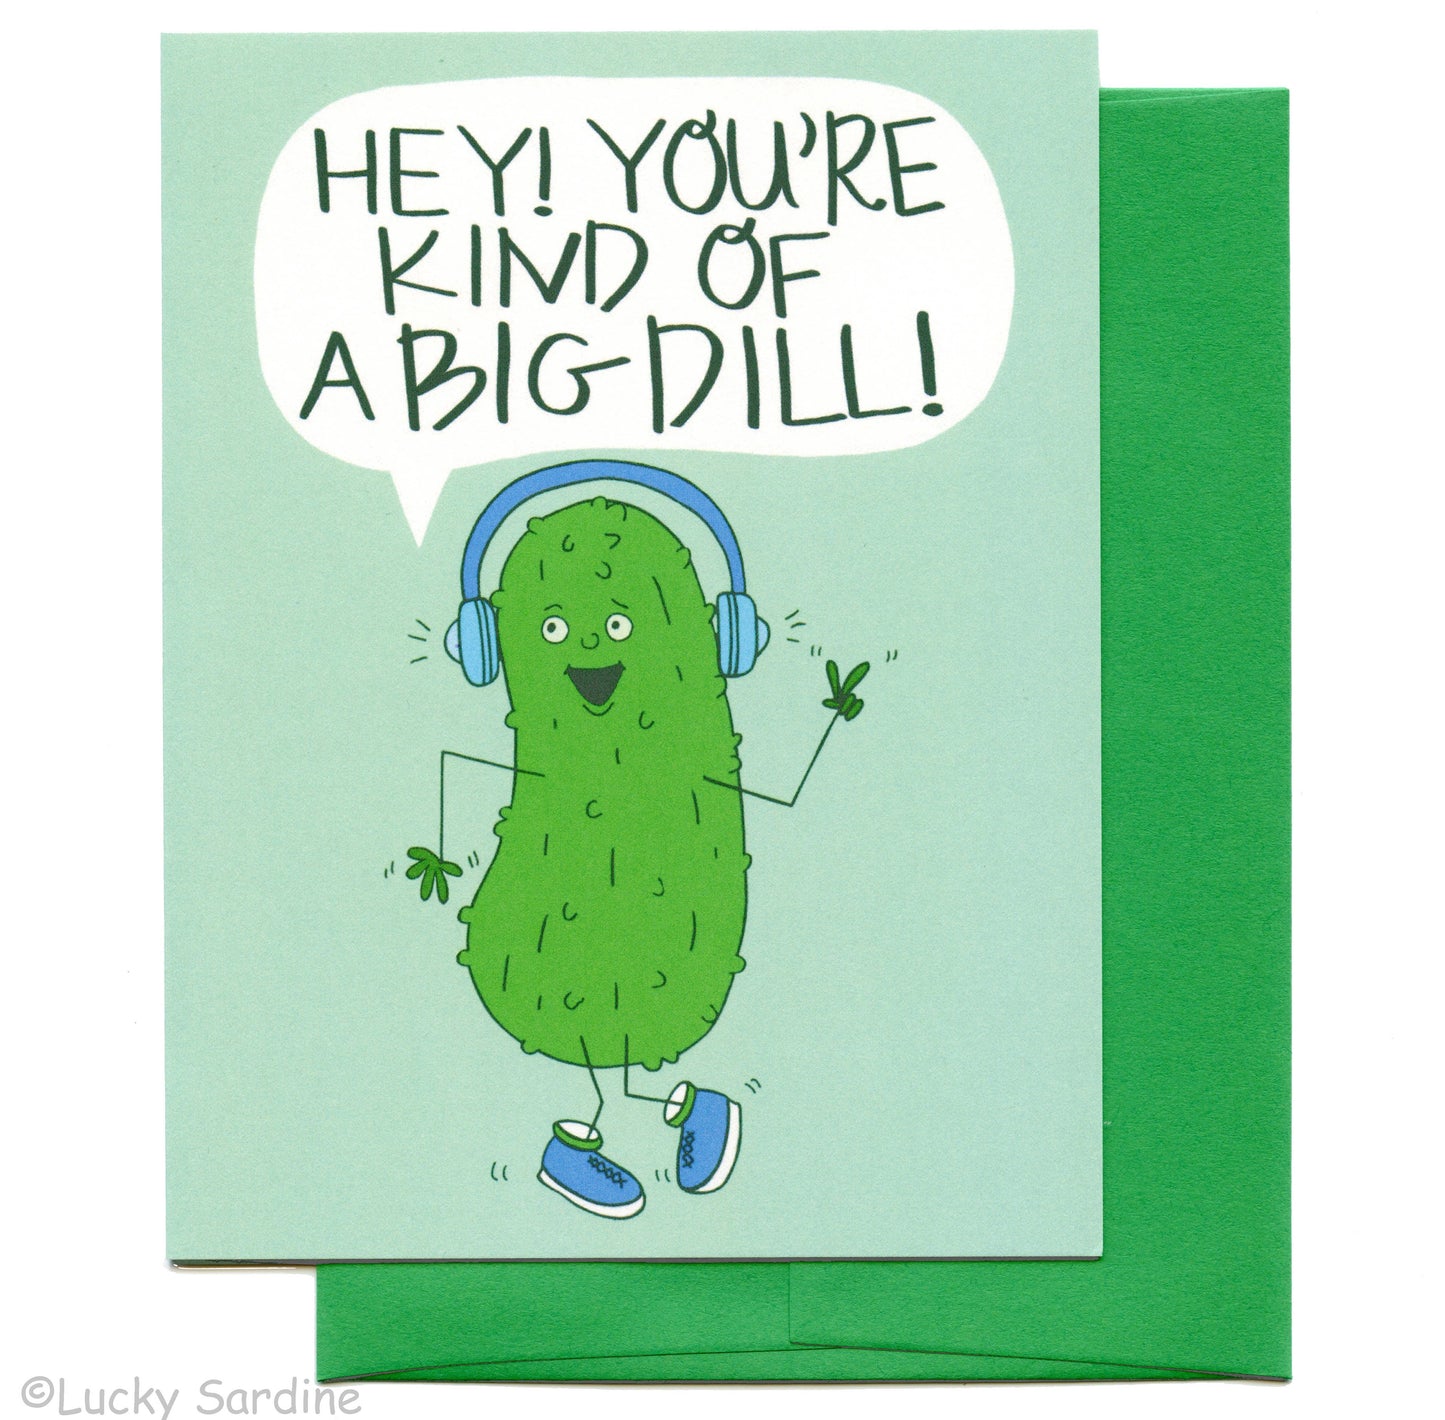 You are Kind Of A Big Dill Greeting Card